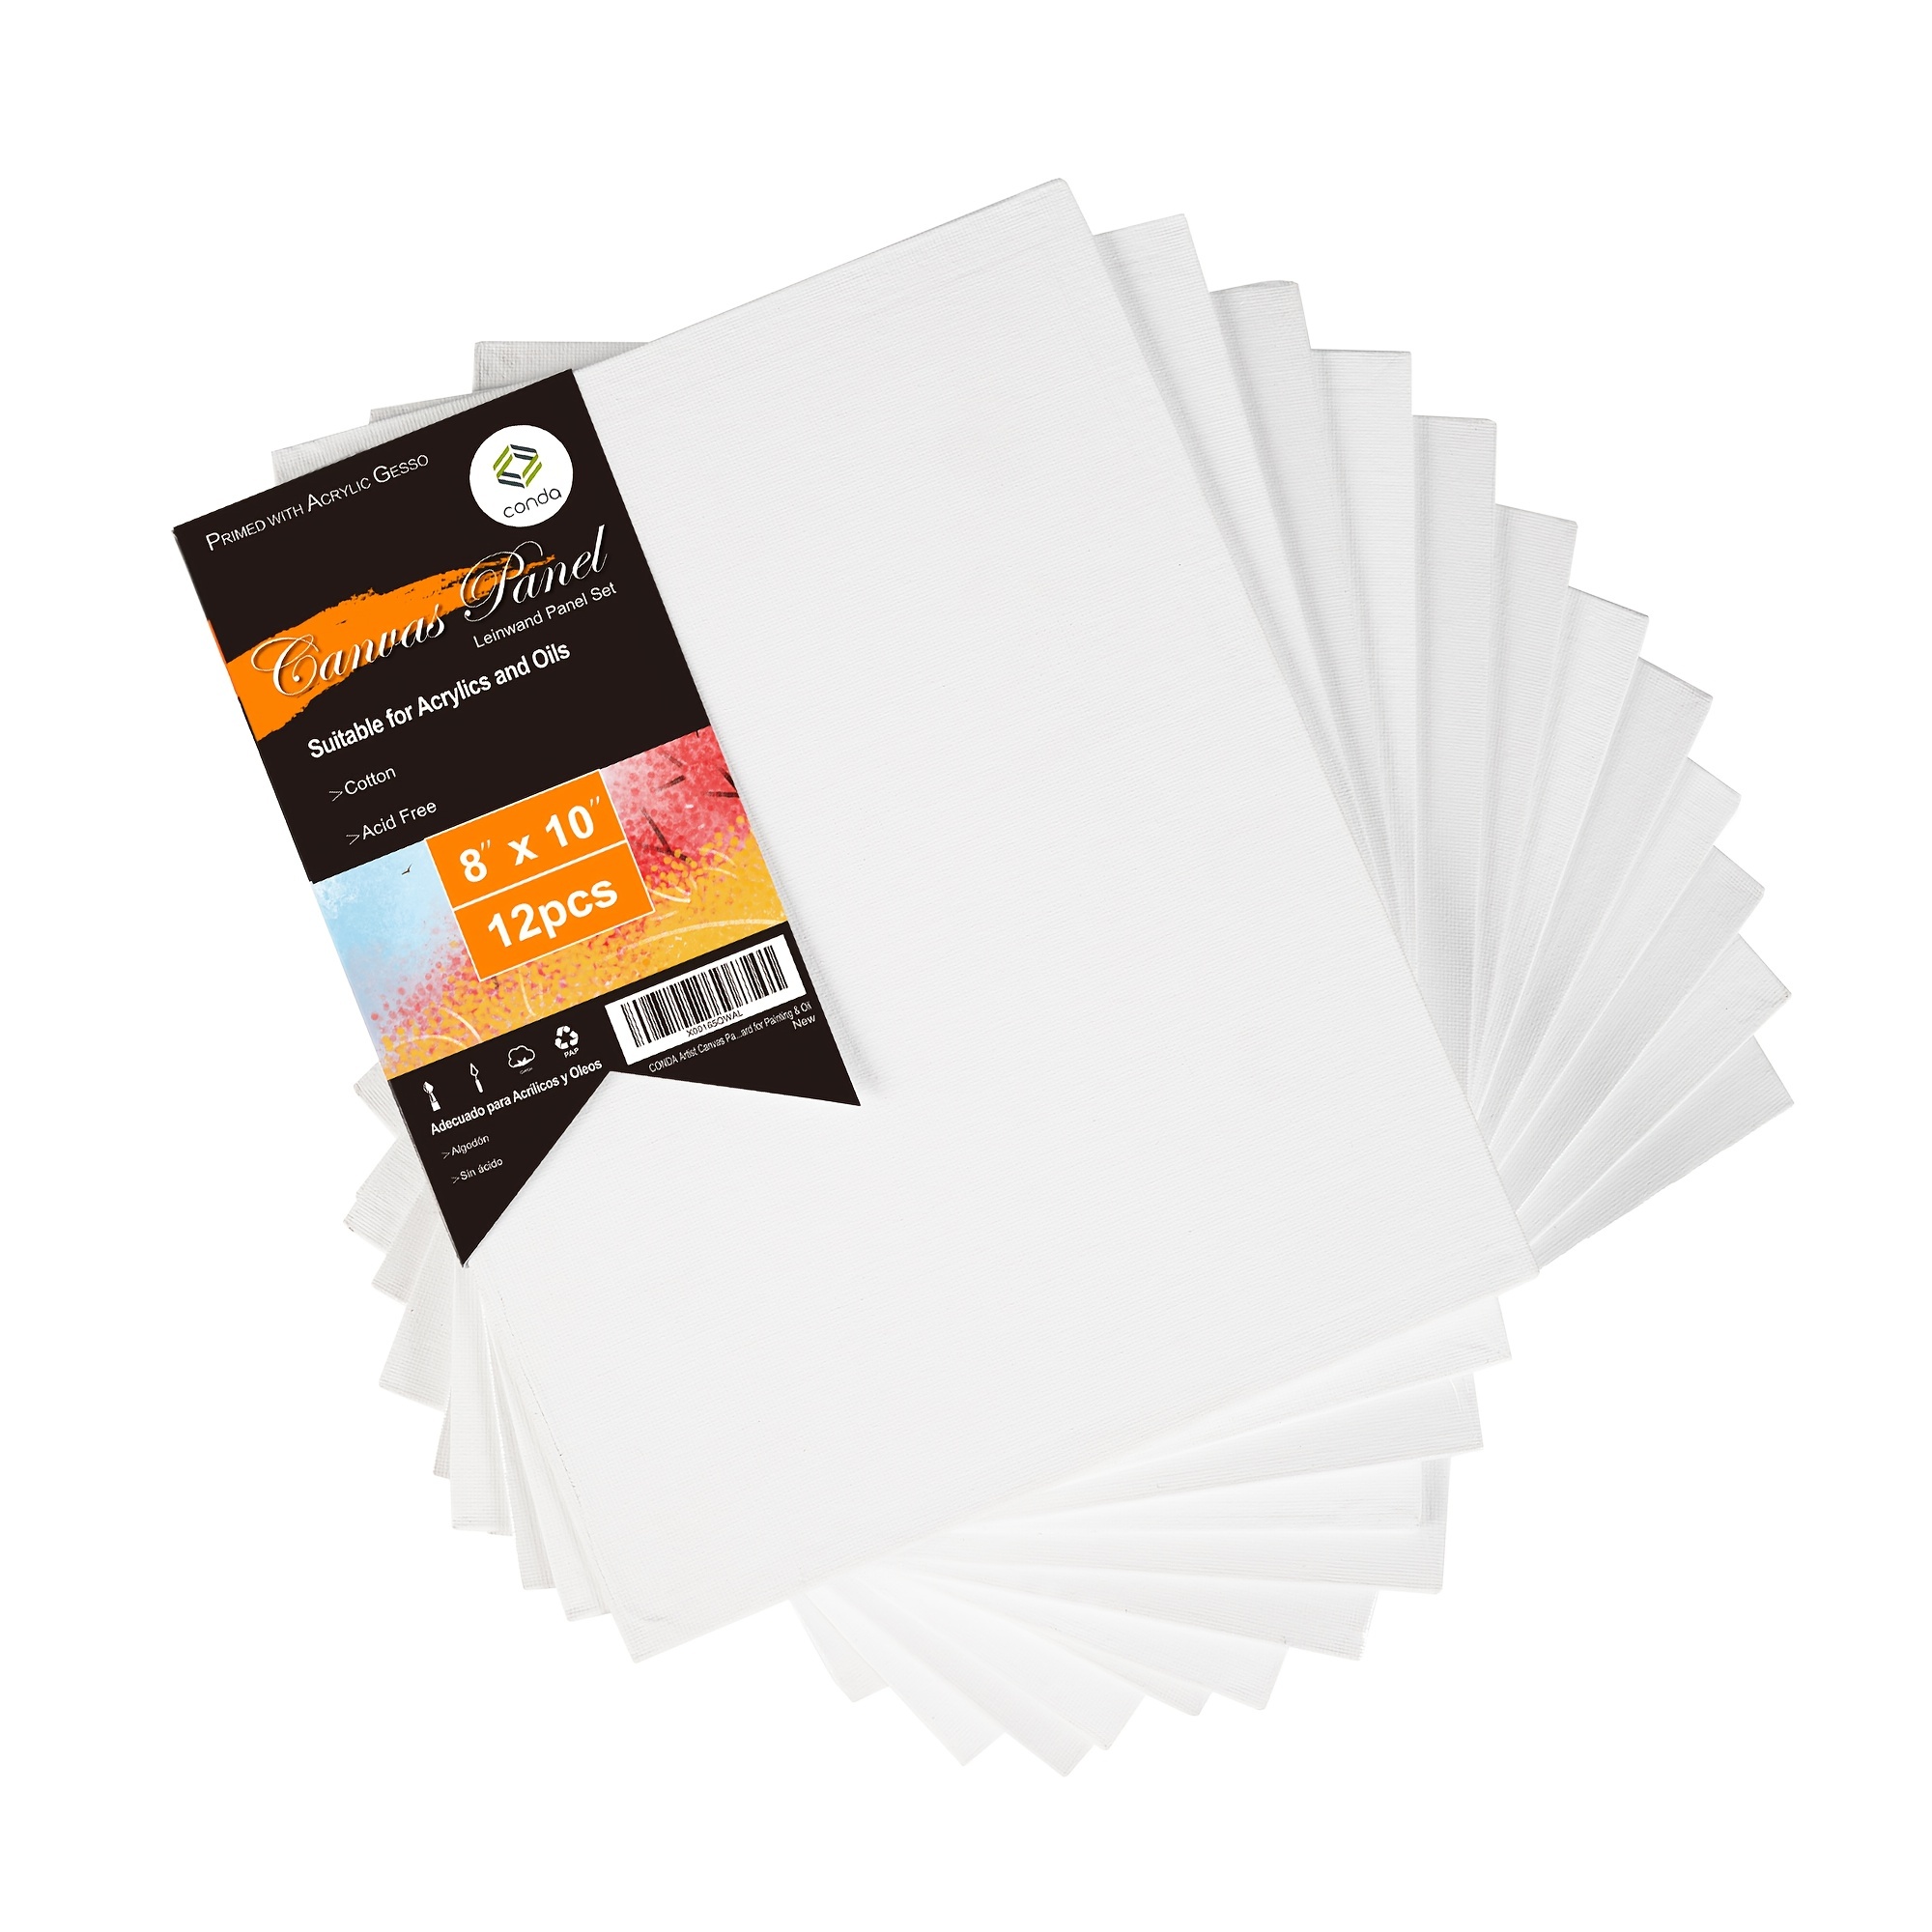 Canvas Panels 6x6 Inch 12-Pack, 10 oz Double Primed Acid-Free 100% Cotton  Blank Canvases for Painting, Square Flat Canvas Board for Oil Acrylics